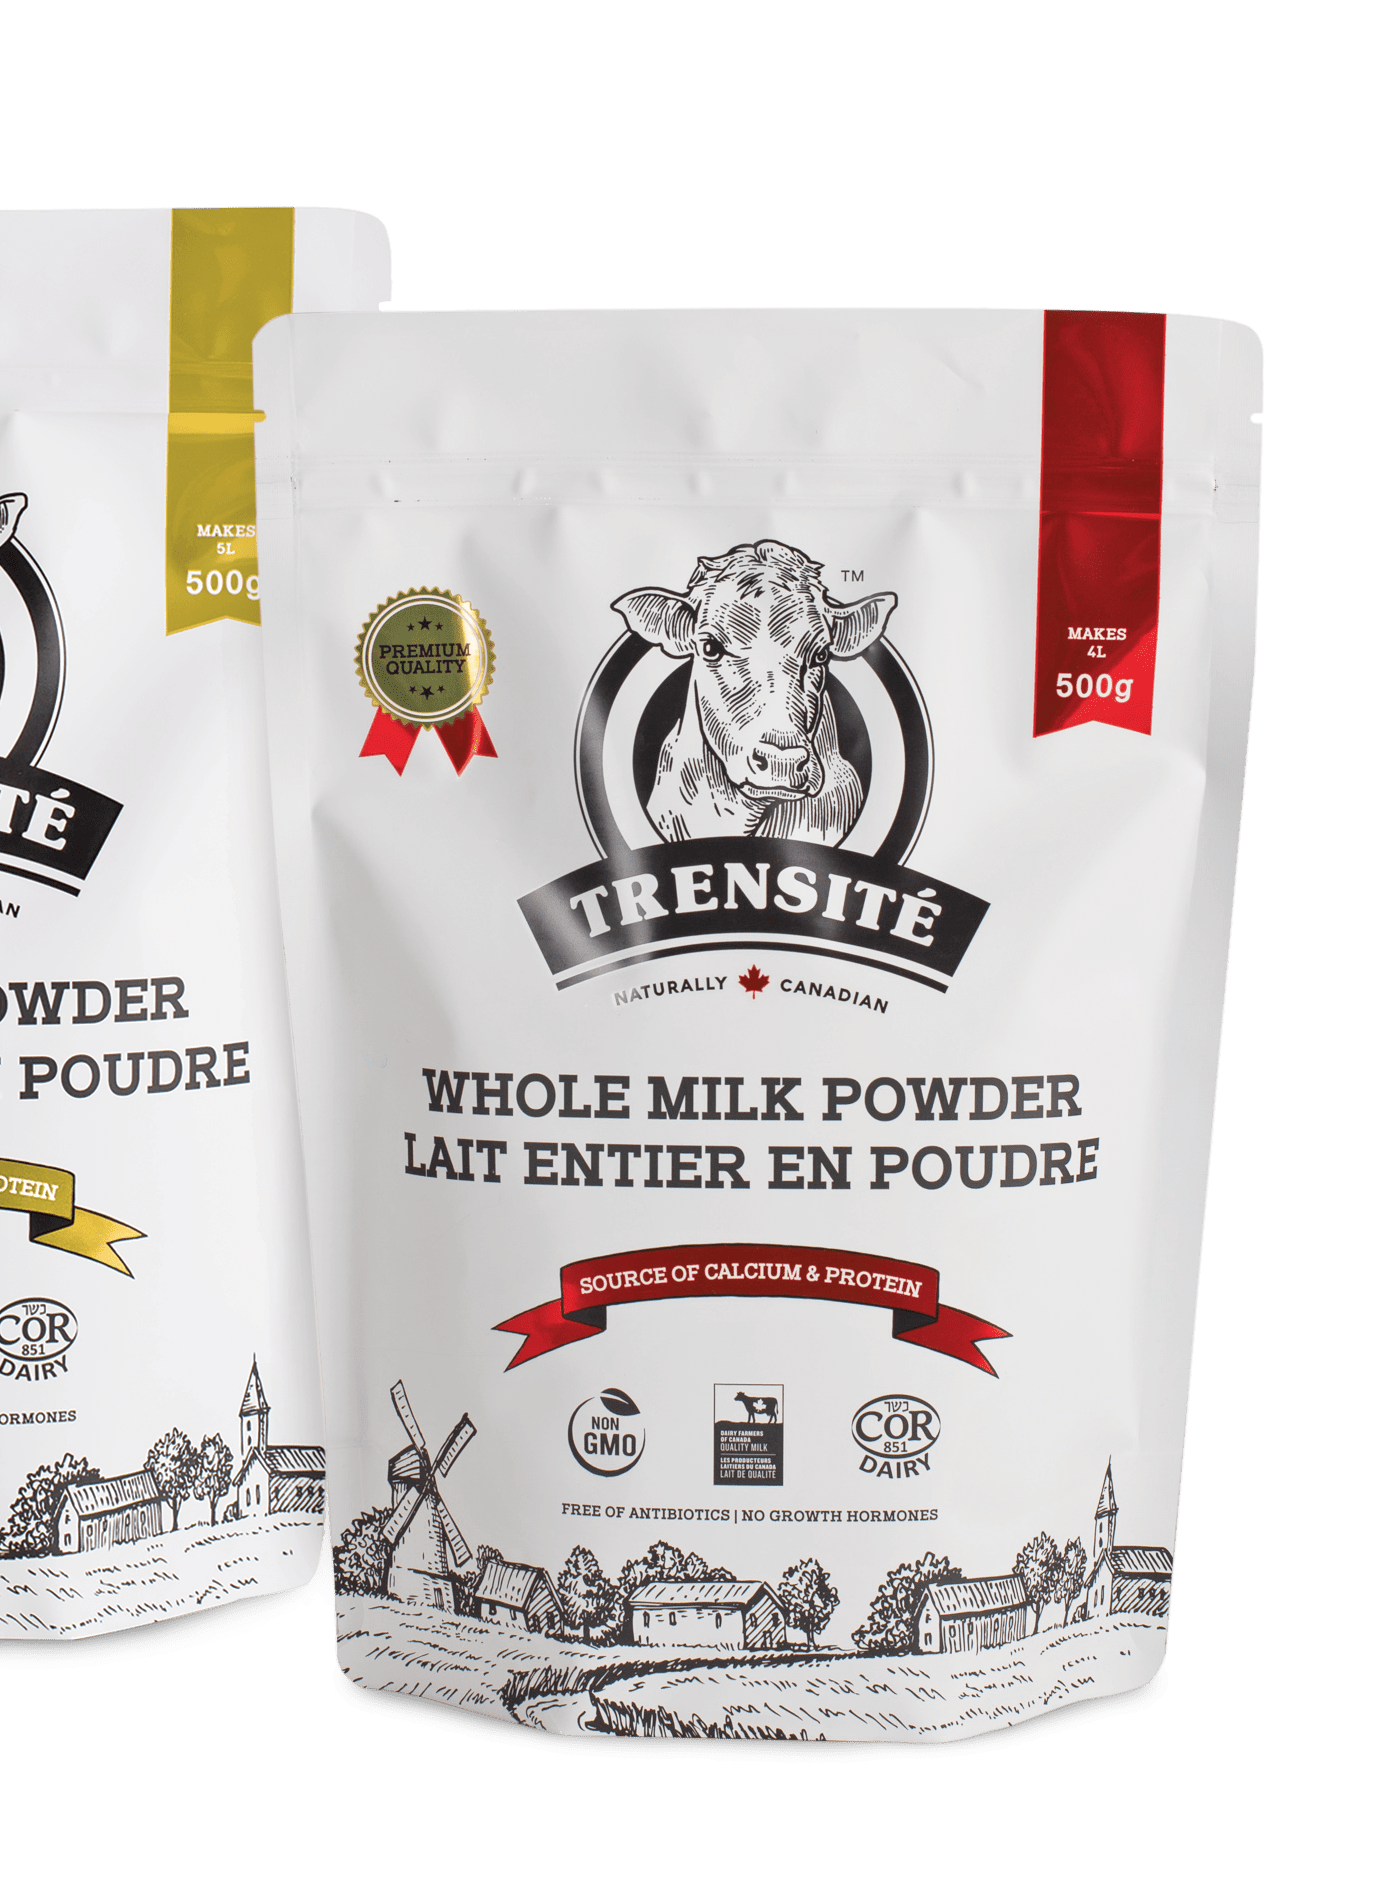 Trensite Dairy Whole Milk Powder Products